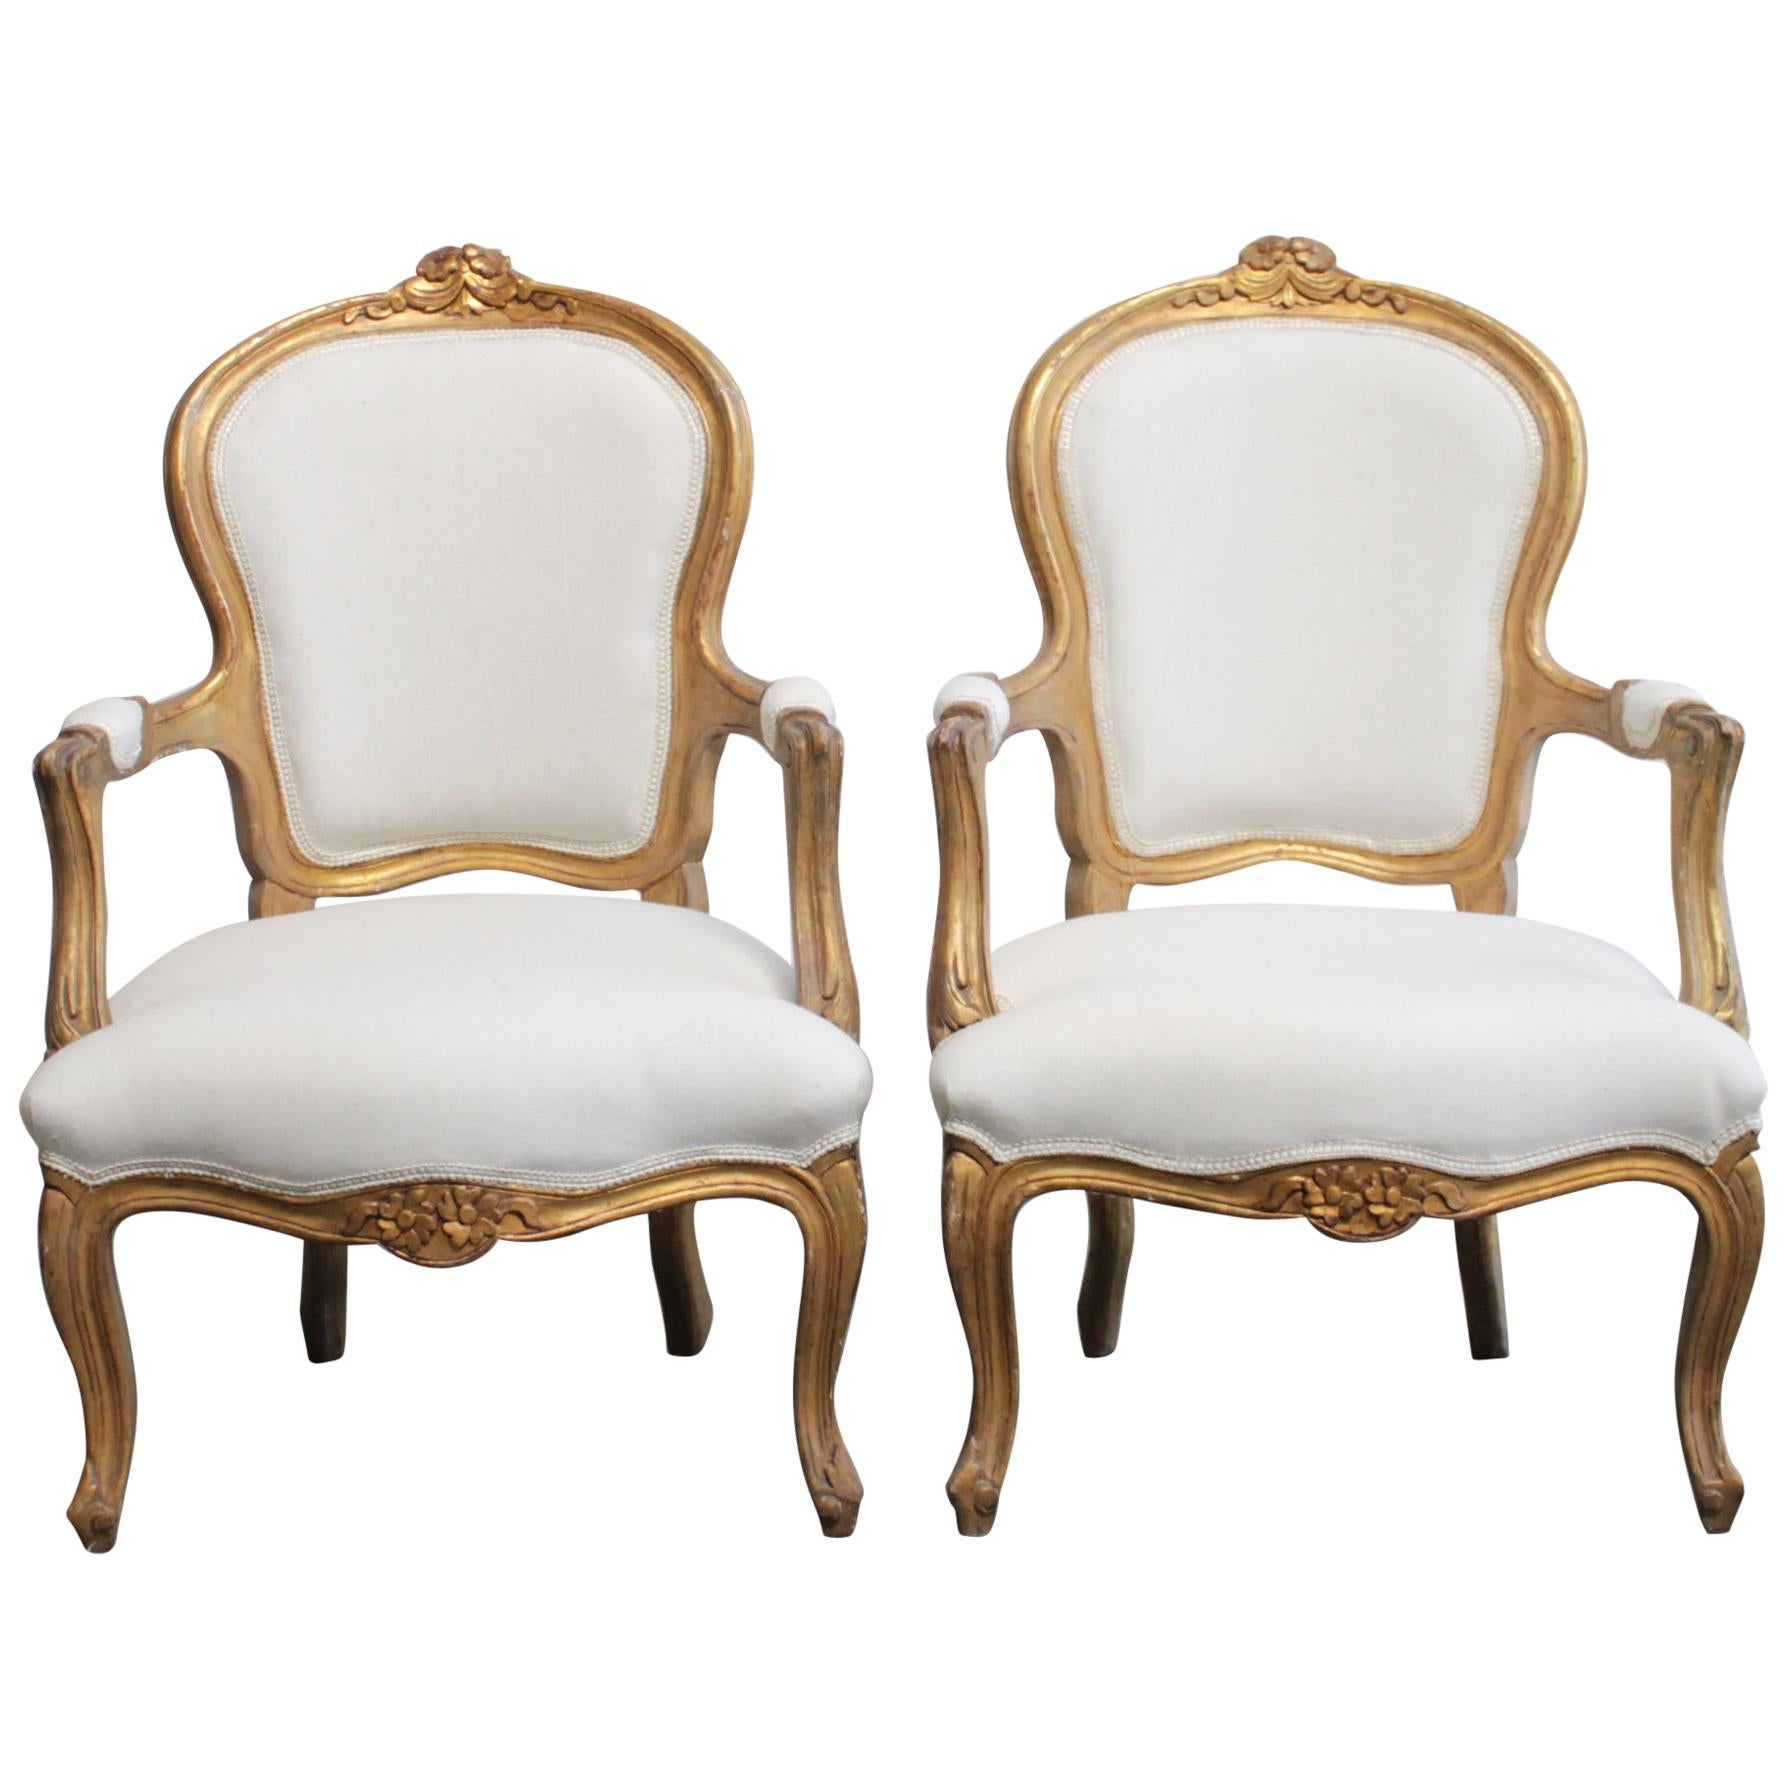 Antique Louis XV Style Giltwood Carved Open Armchairs